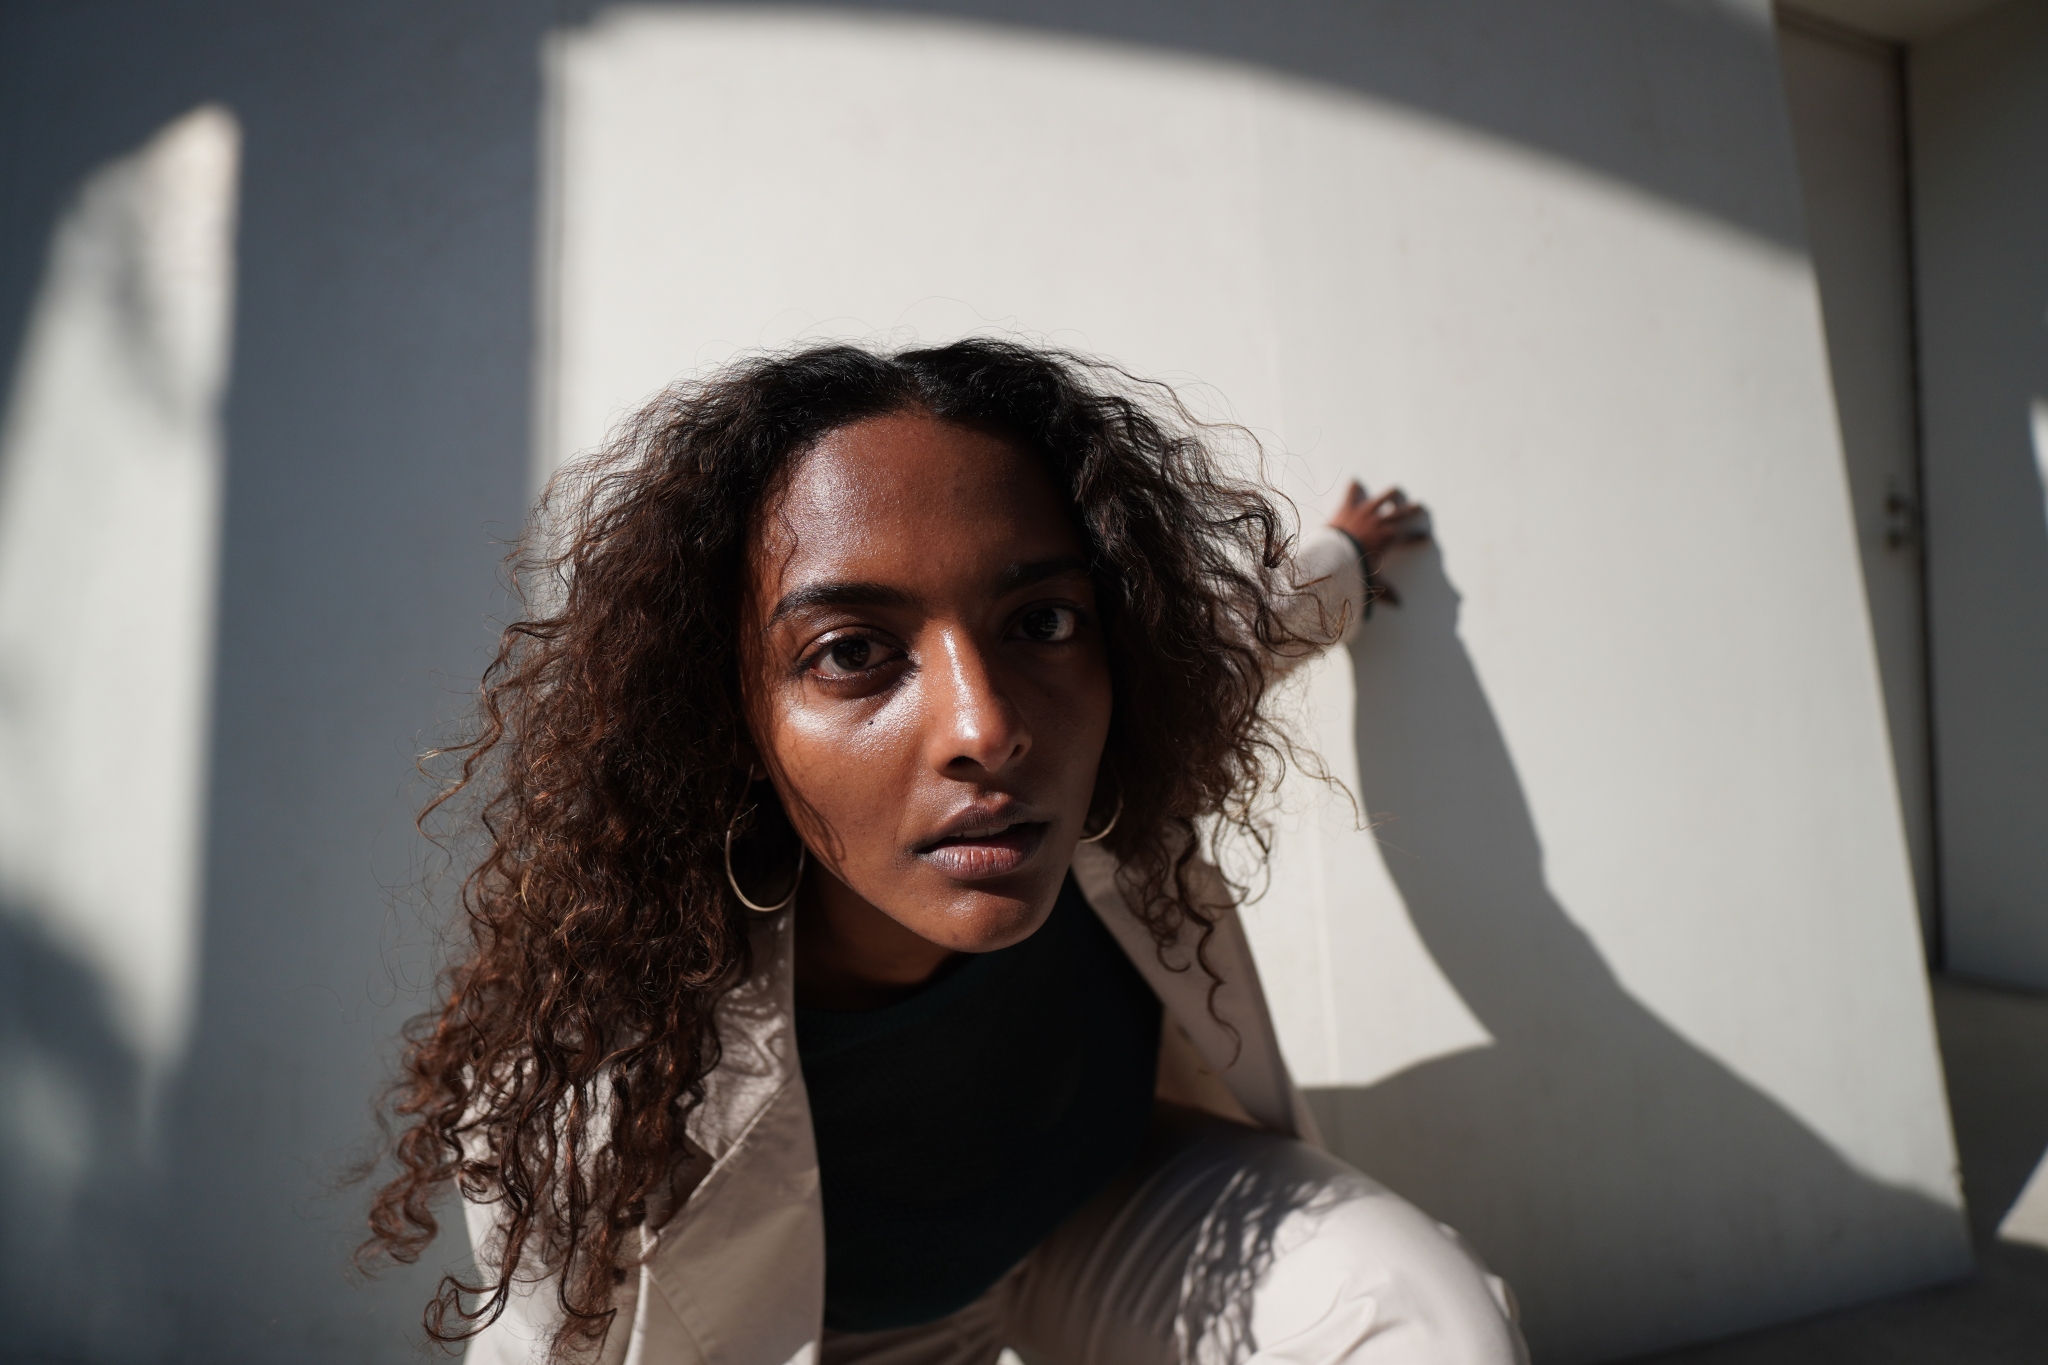 Portrait of a female model with half her face in shadow